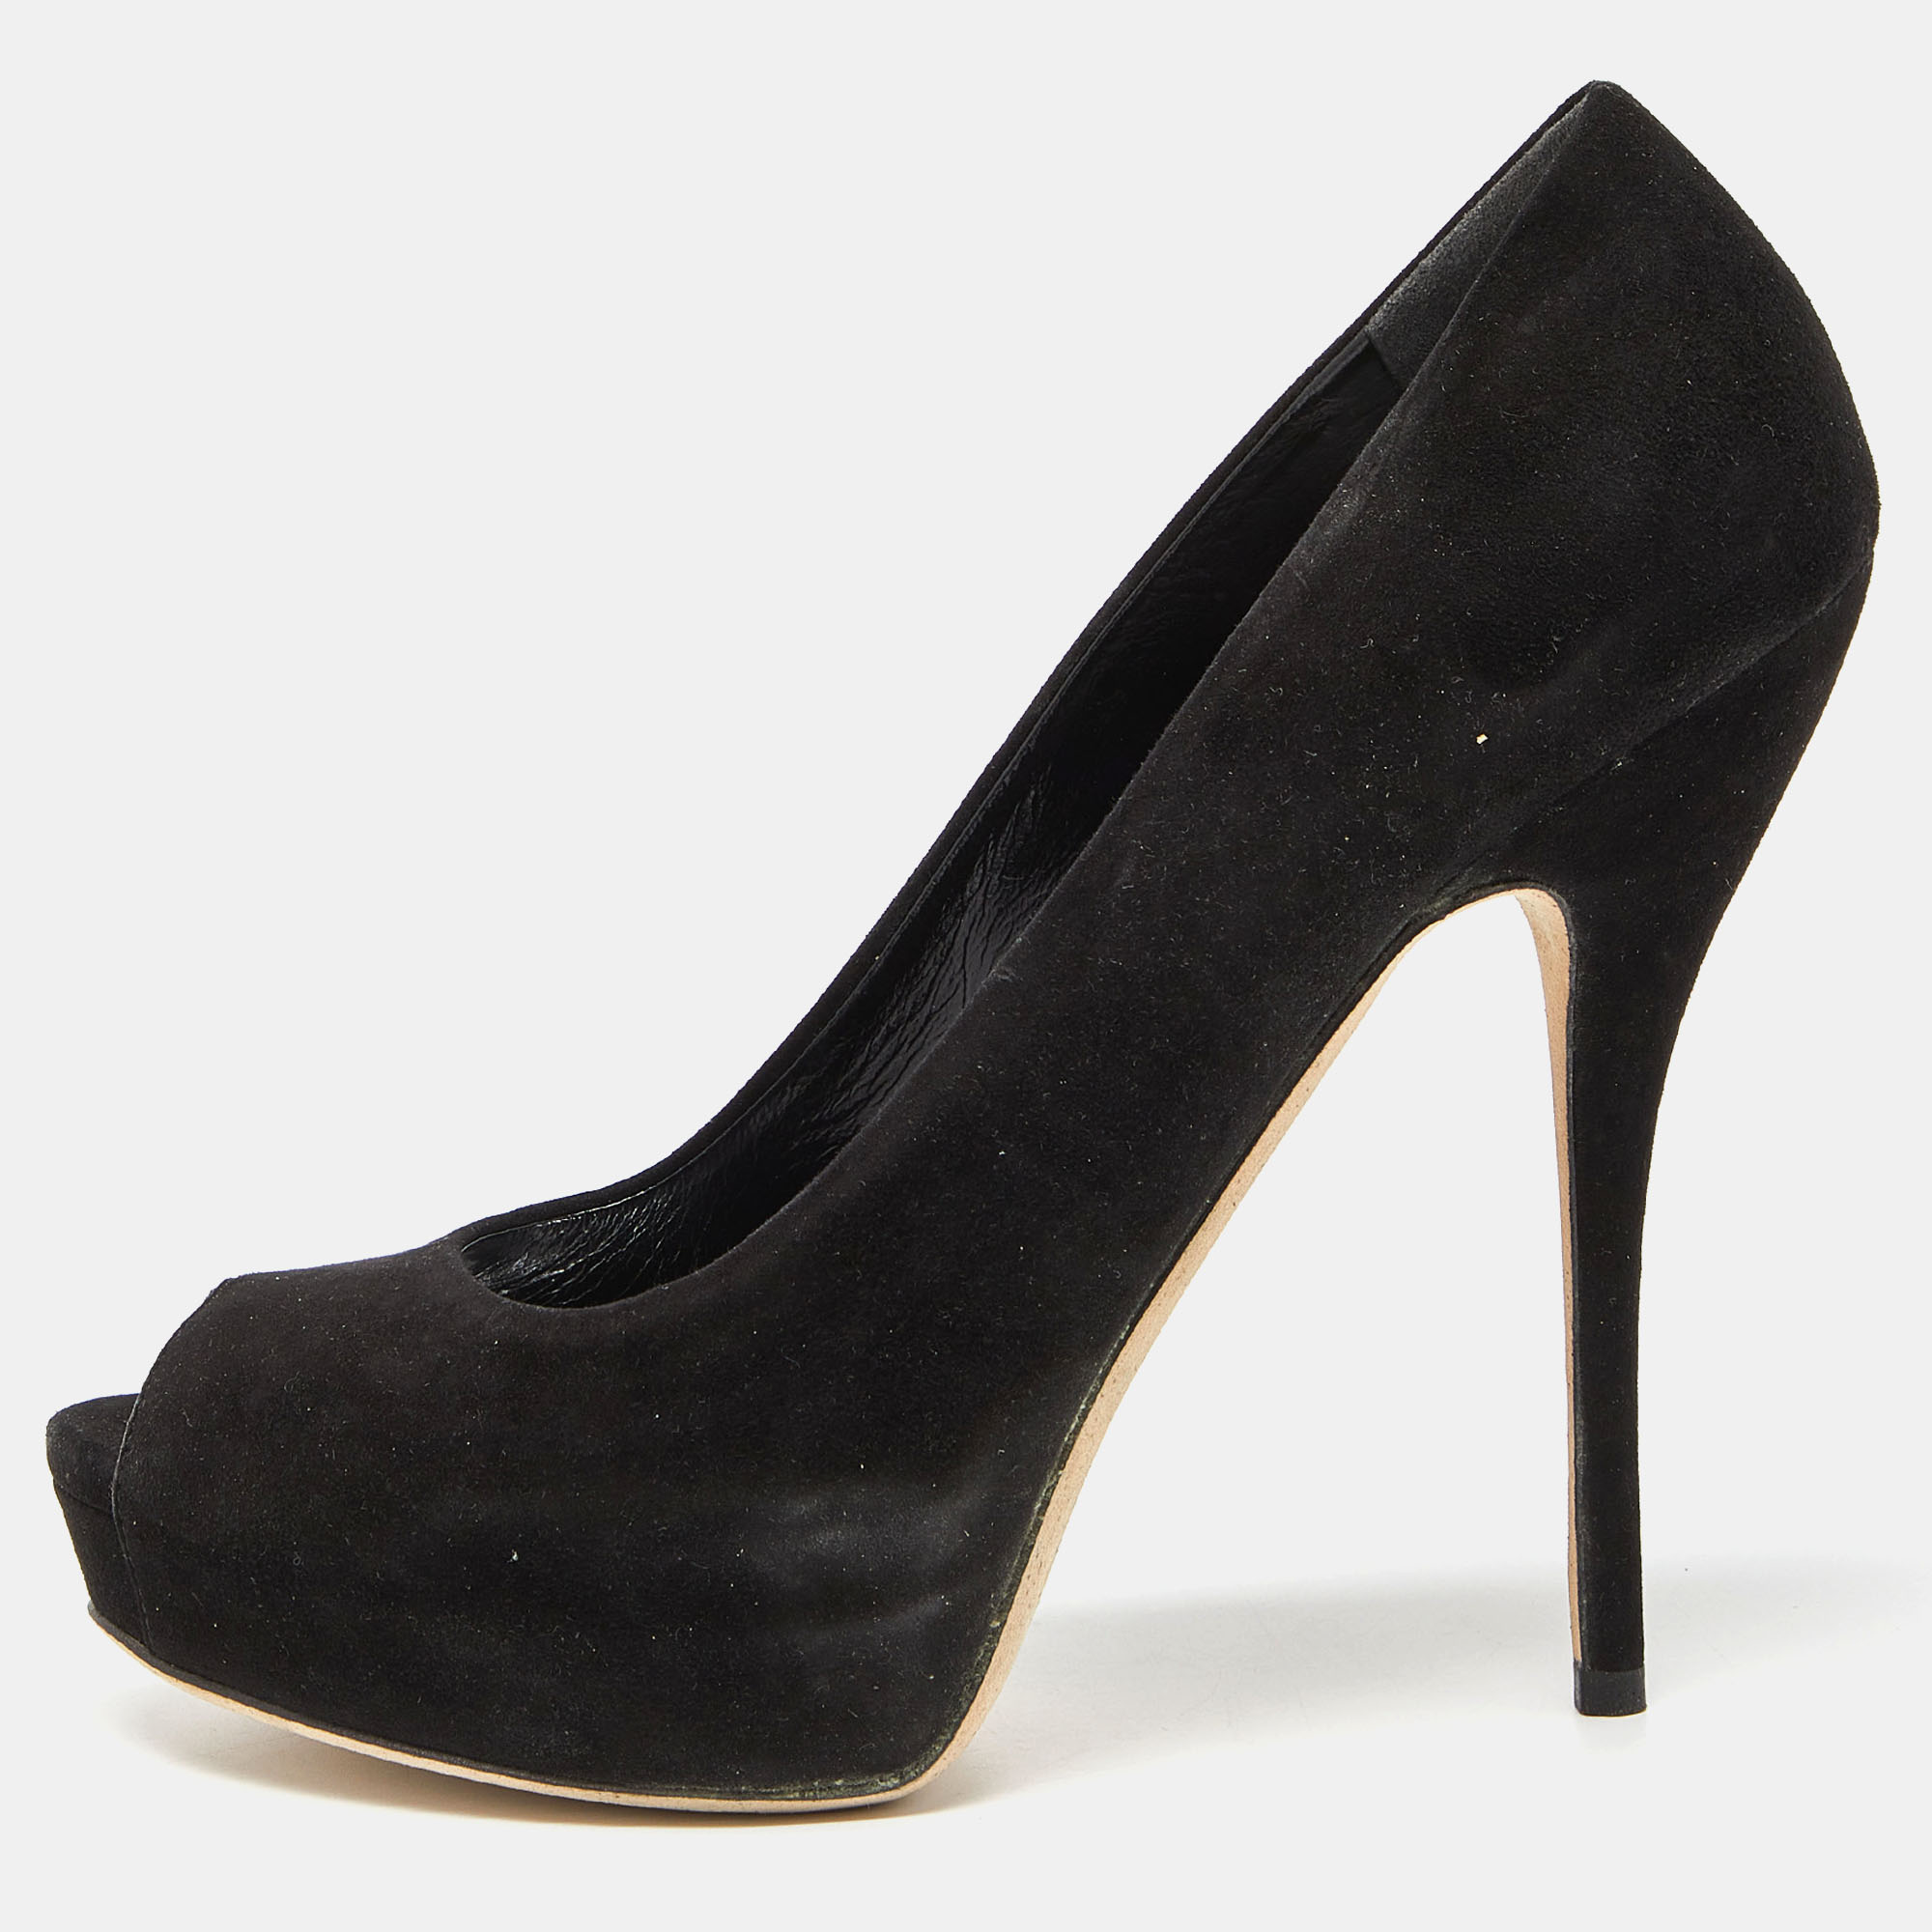 Make a chic style statement with these Gucci black suede pumps. They showcase sturdy heels and durable soles perfect for your fashionable outings